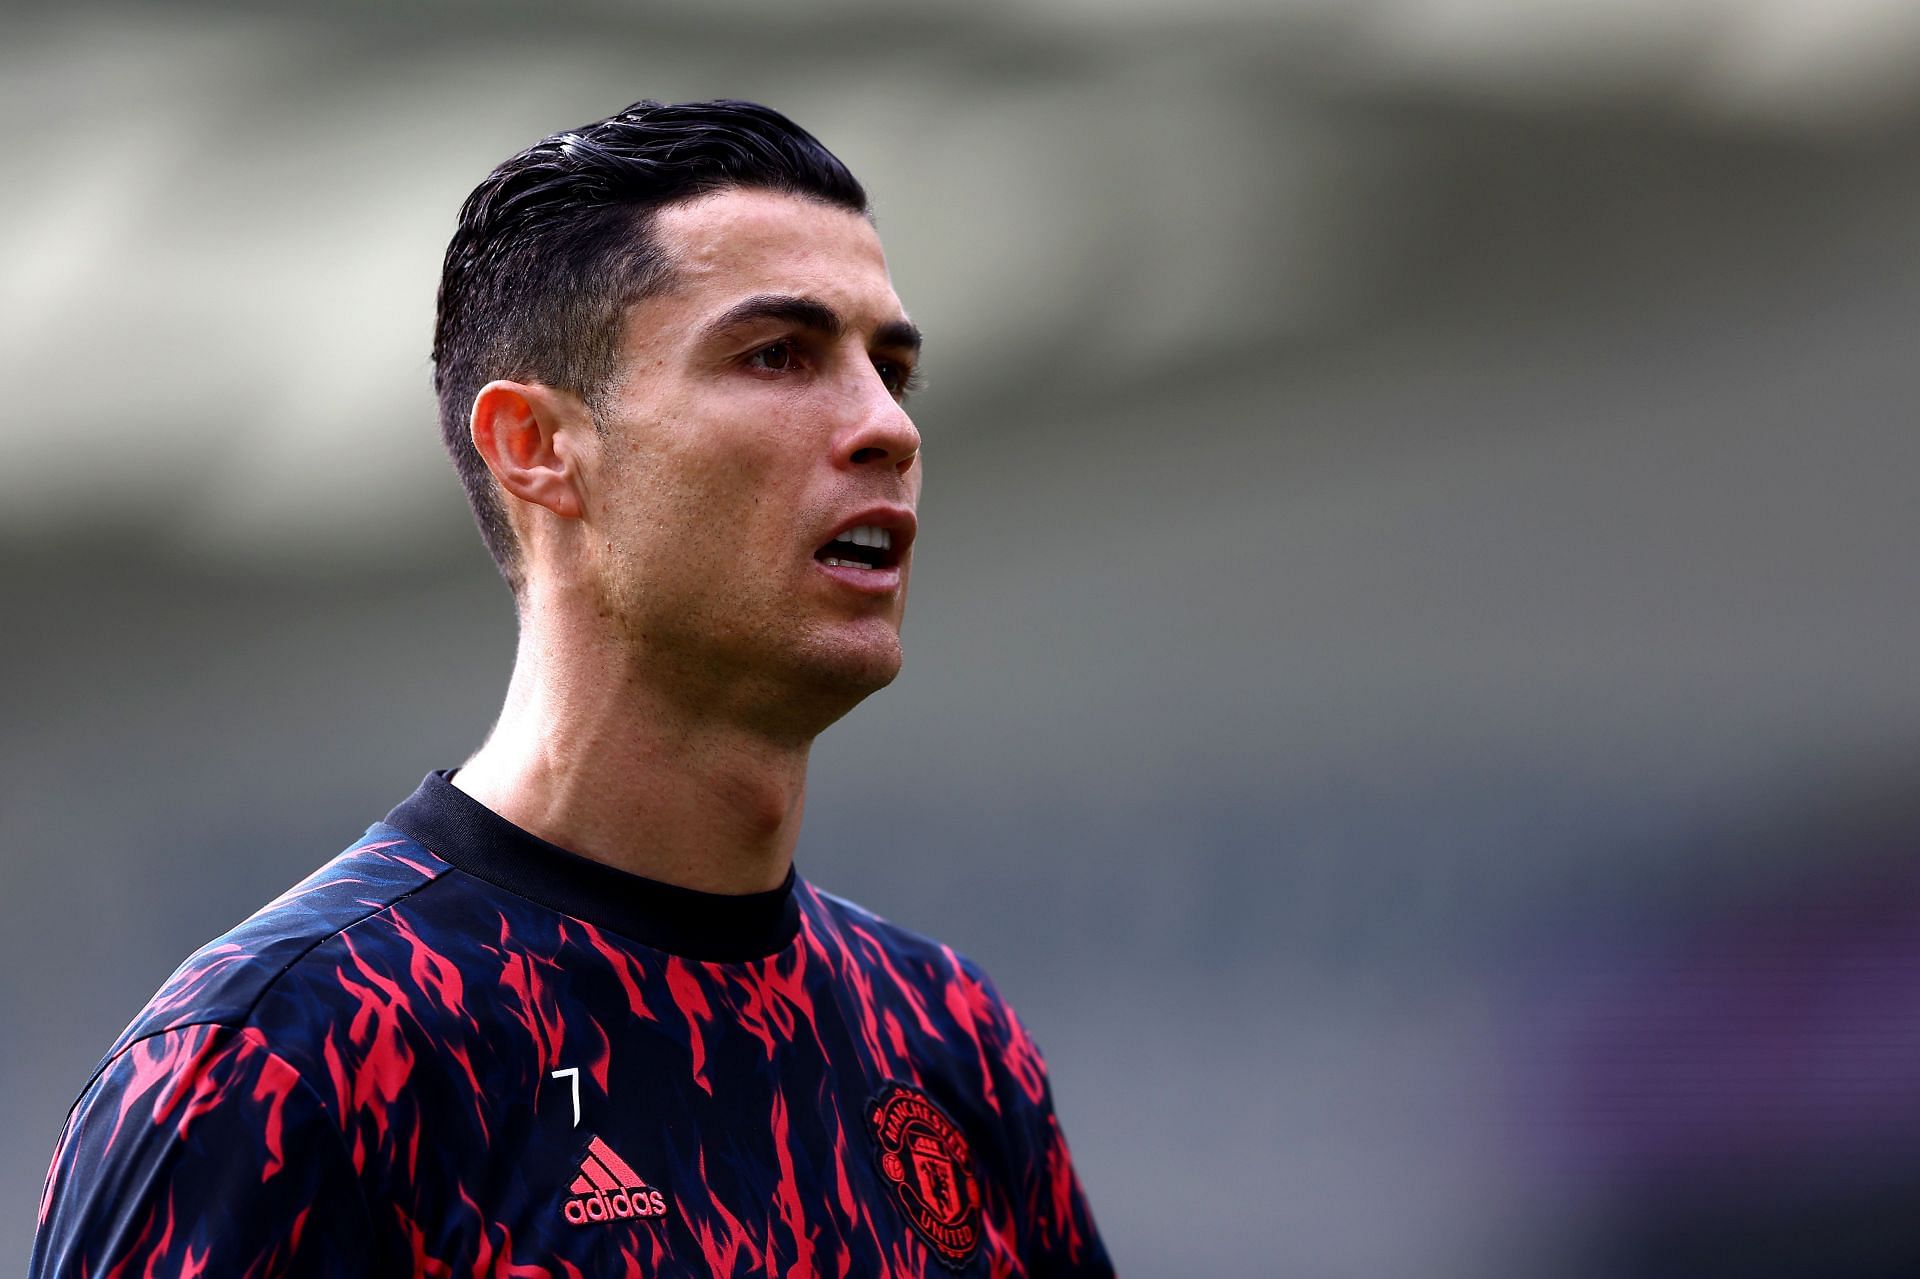 Ronaldo is set to miss the final league game. (Photo by Bryn Lennon/Getty Images)